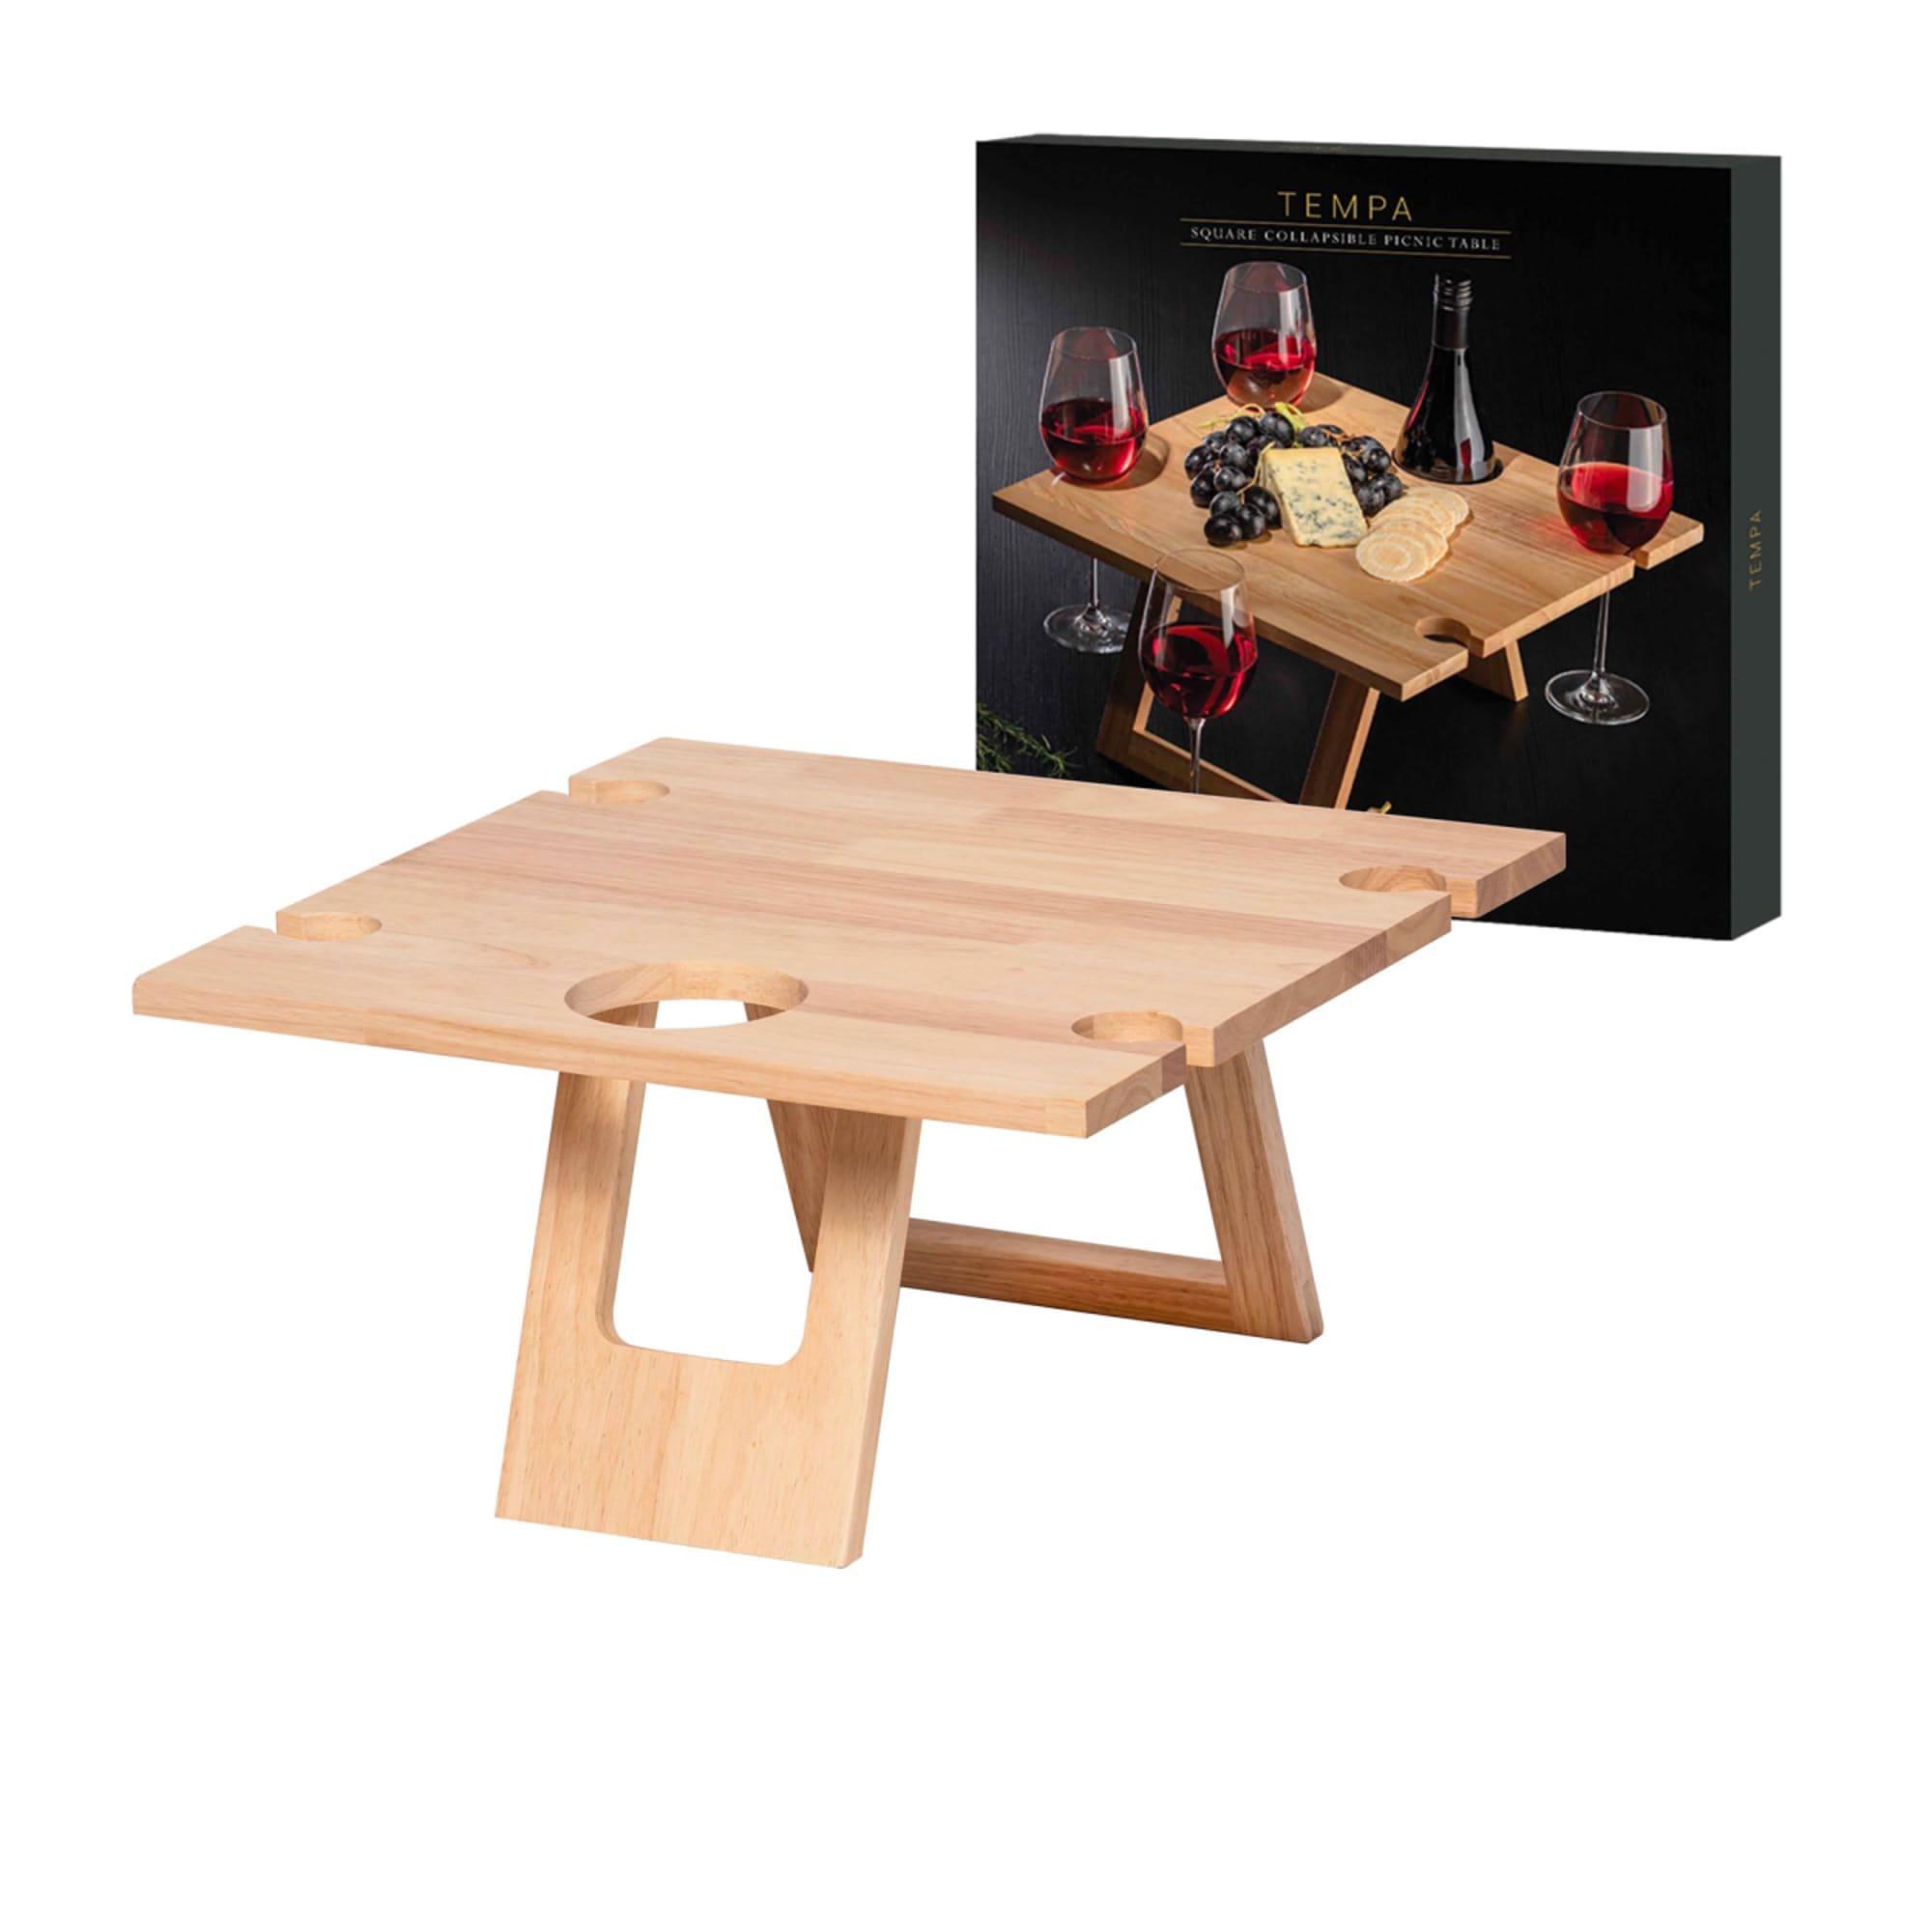 Tempa Fromagerie Square Collapsible Picnic Table Image 5